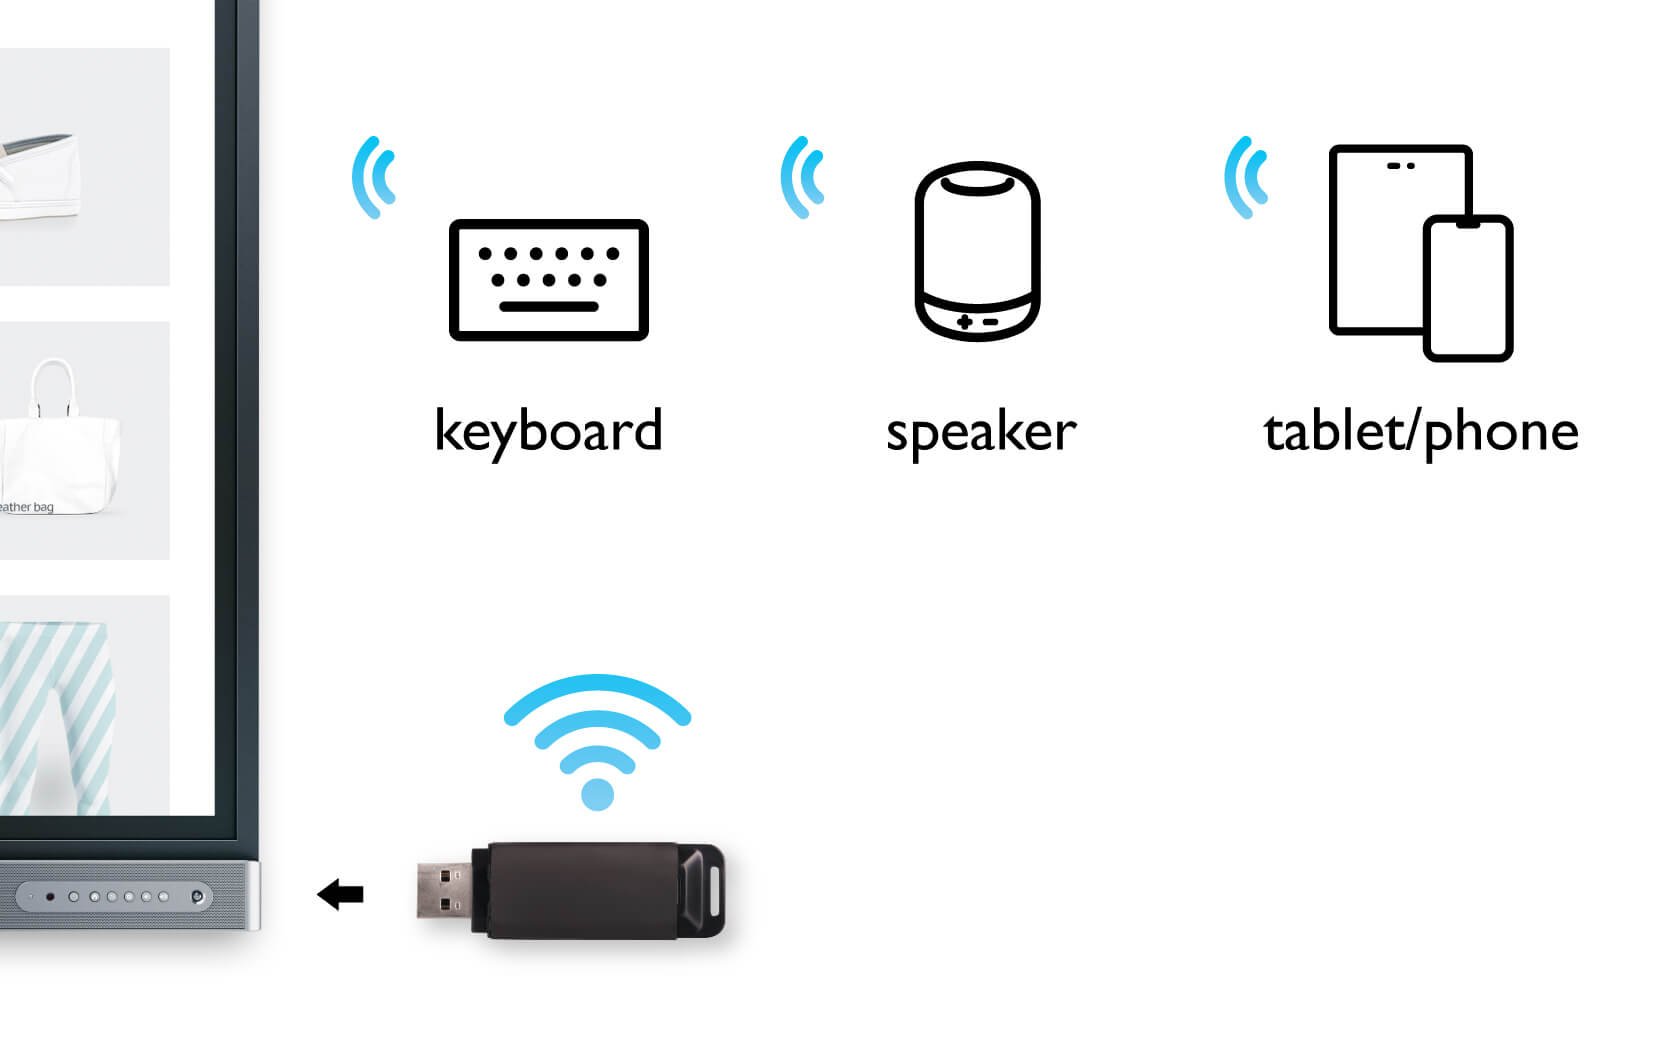 BenQ wifi dongle provides easy hotspot wifi sharing and bluetooth connection.